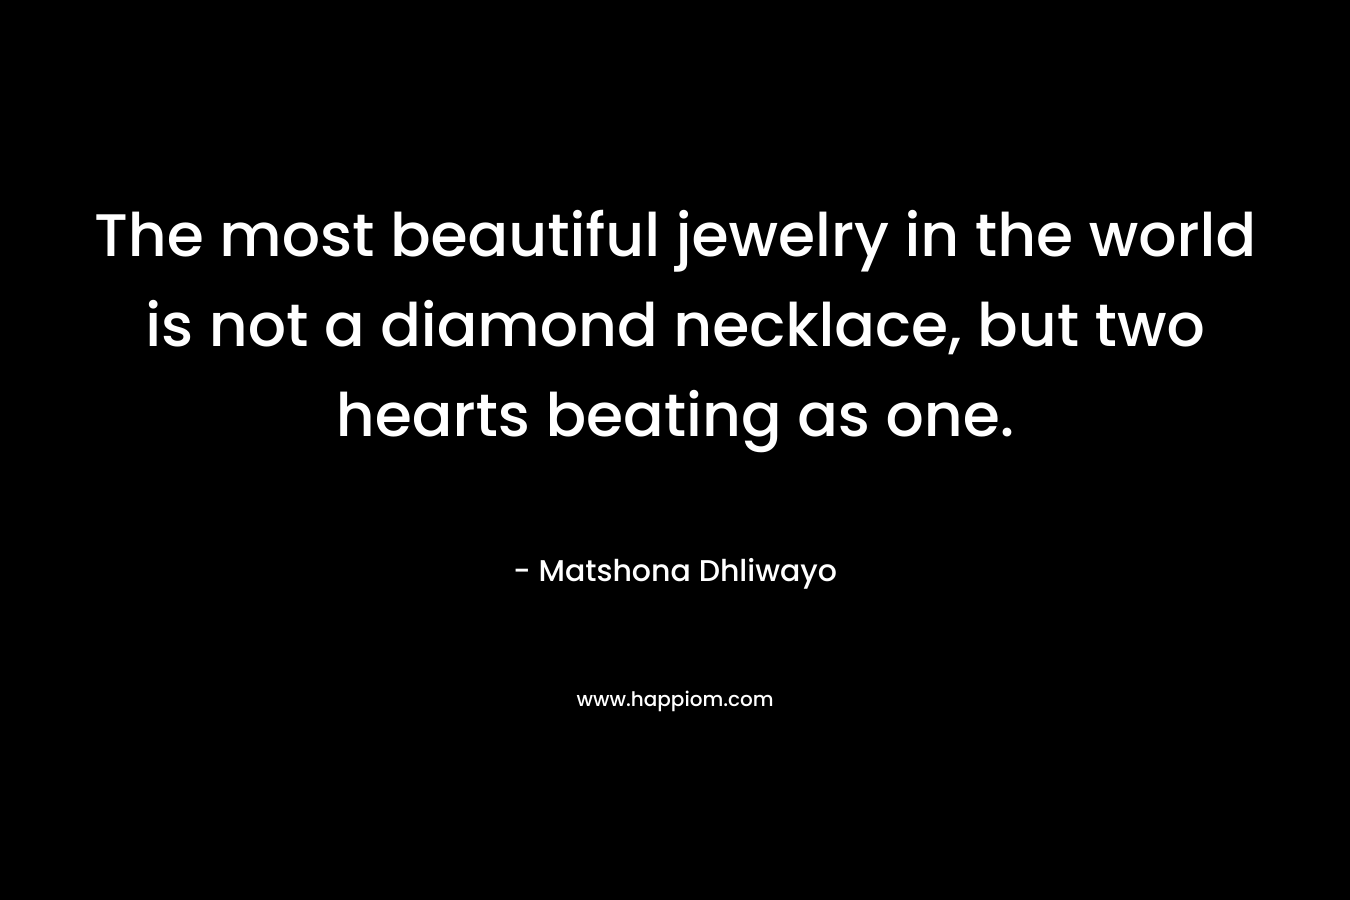 The most beautiful jewelry in the world is not a diamond necklace, but two hearts beating as one. – Matshona Dhliwayo